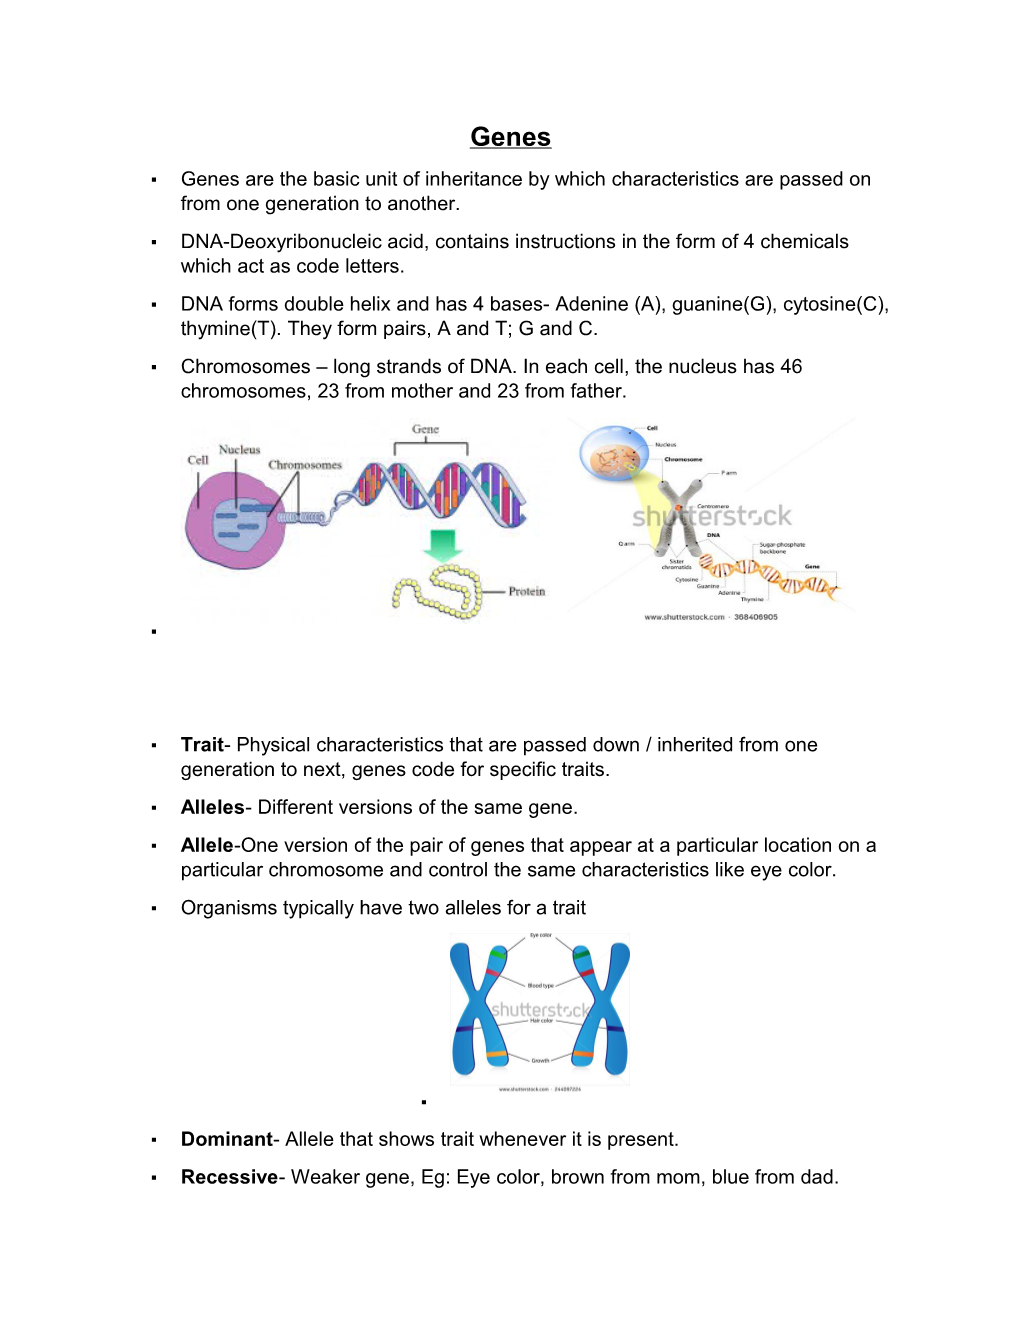 Genes Are the Basic Unit of Inheritance by Which Characteristics Are Passed on from One